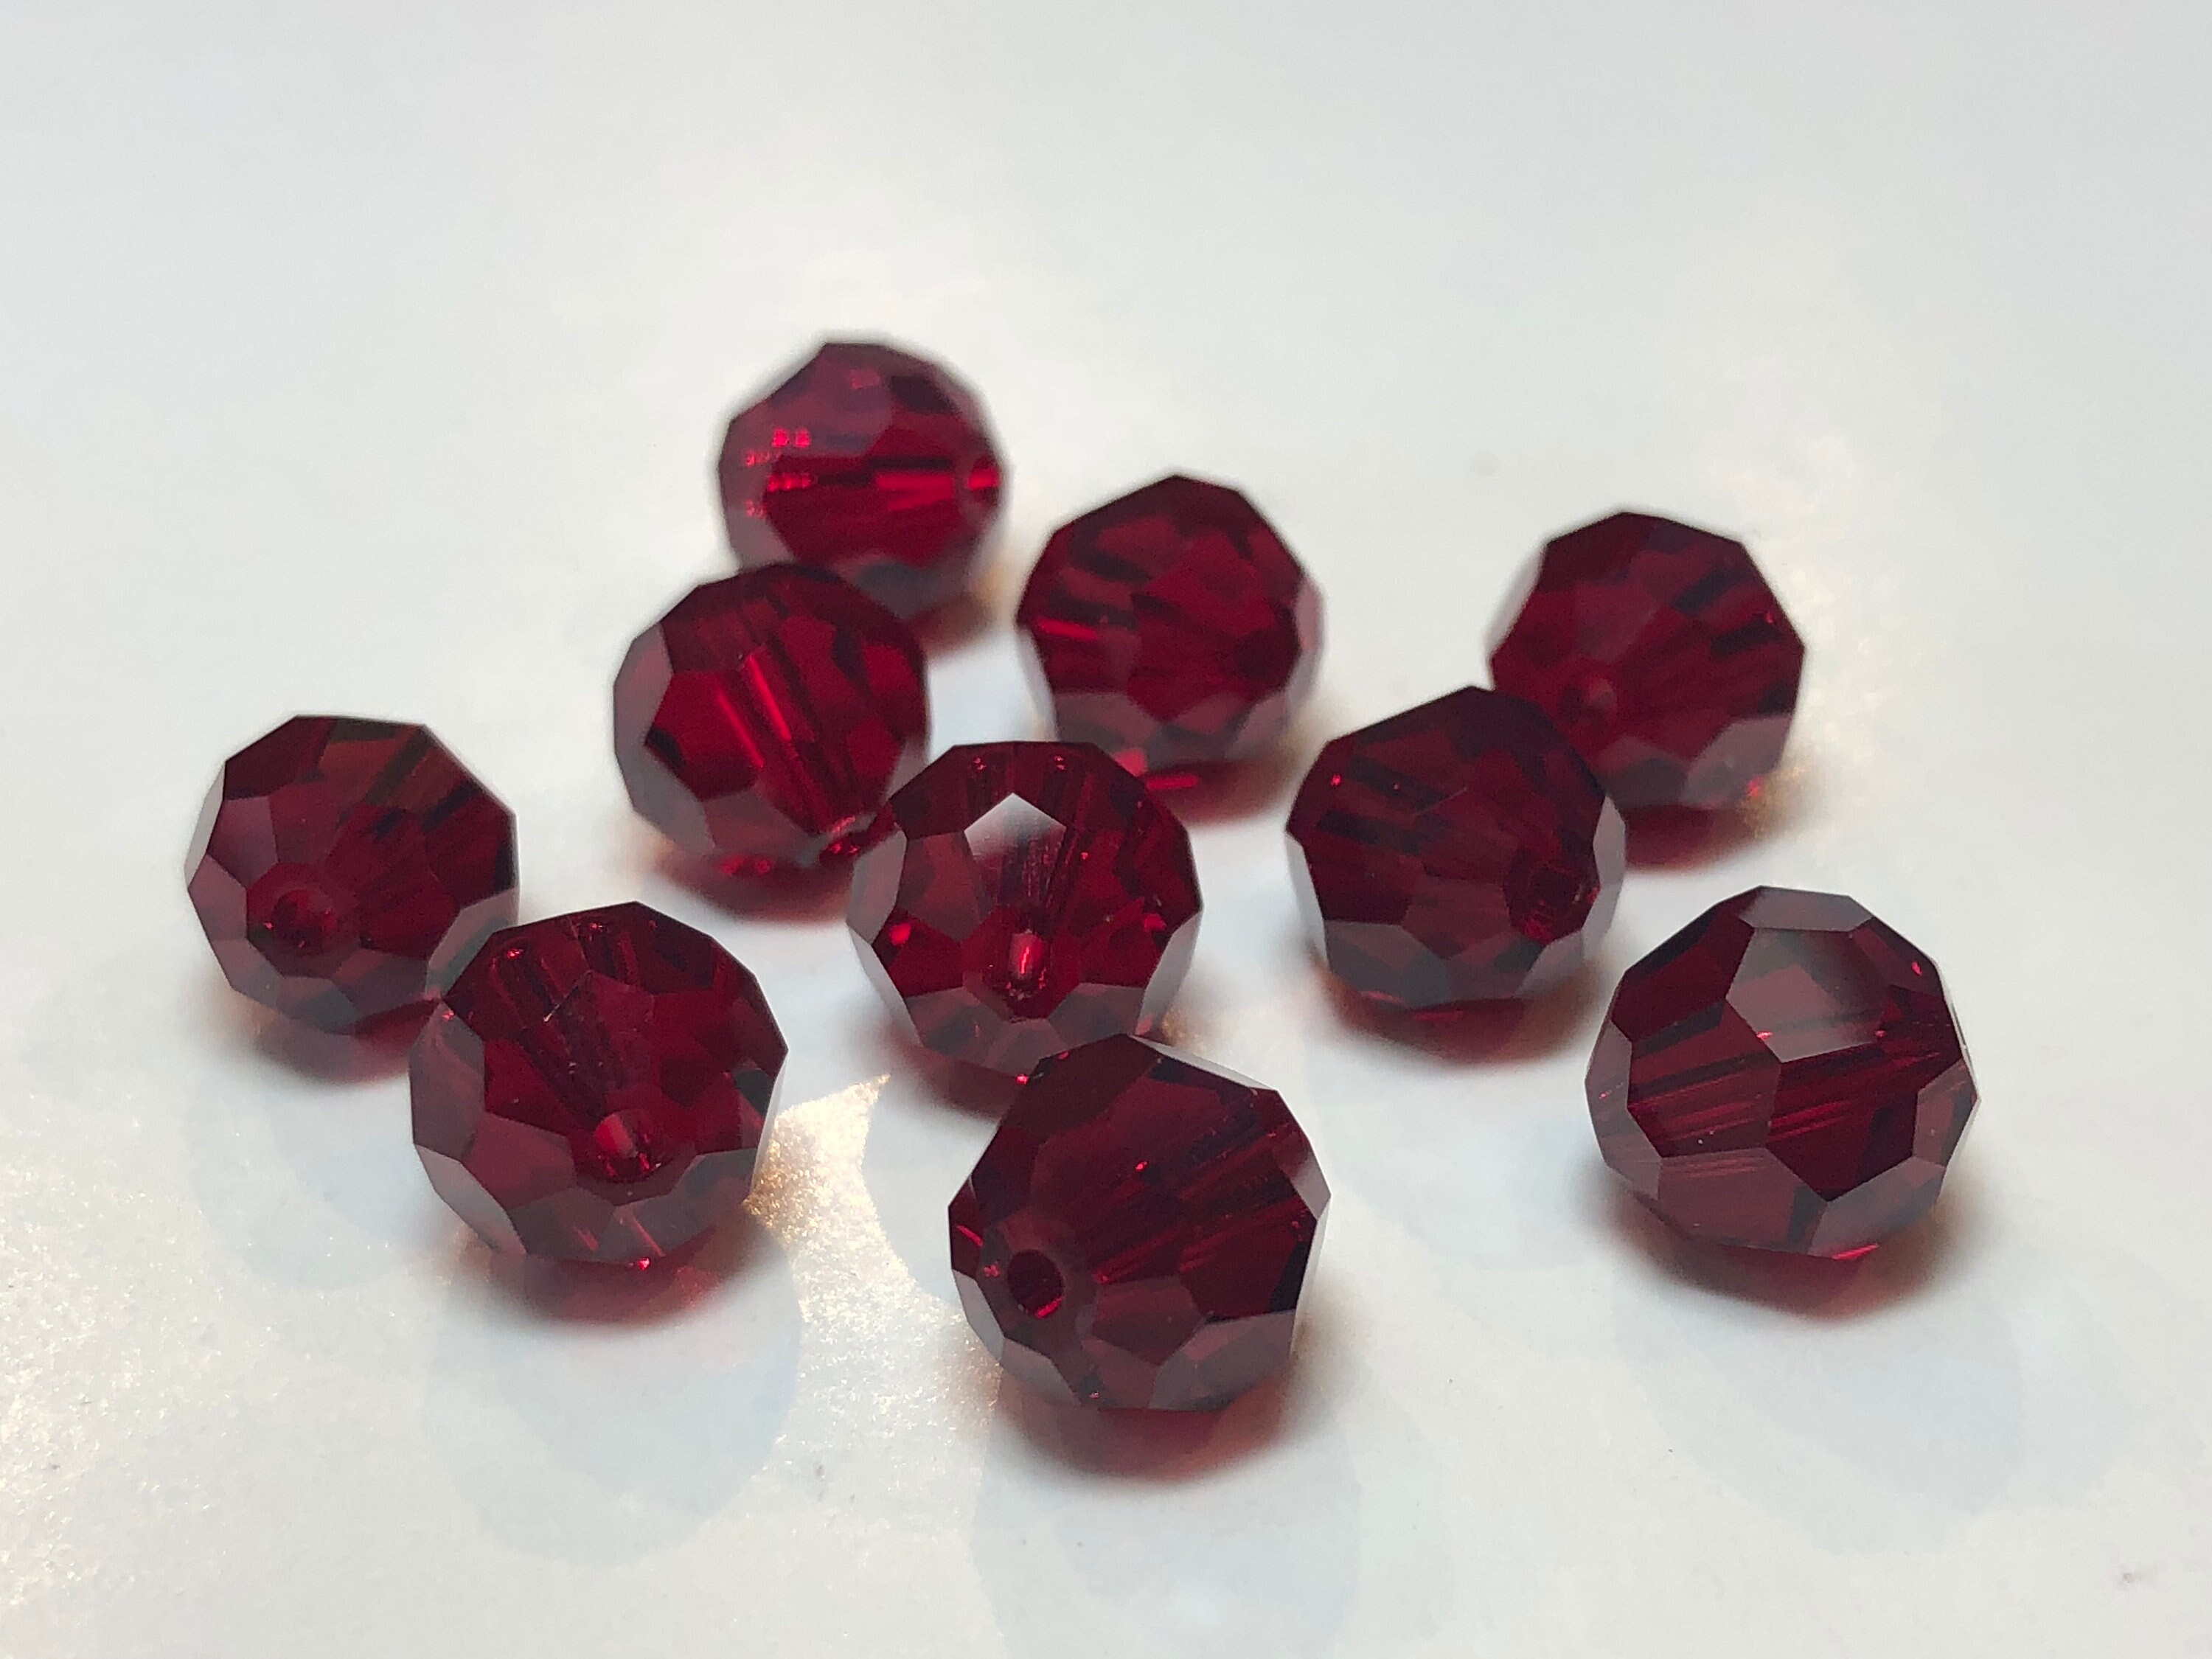 50pcs Adabele Austrian 6mm Faceted Round Crystal Beads Siam Red Compatible with 5000 Swarovski Crystals Preciosa Ss2r-605